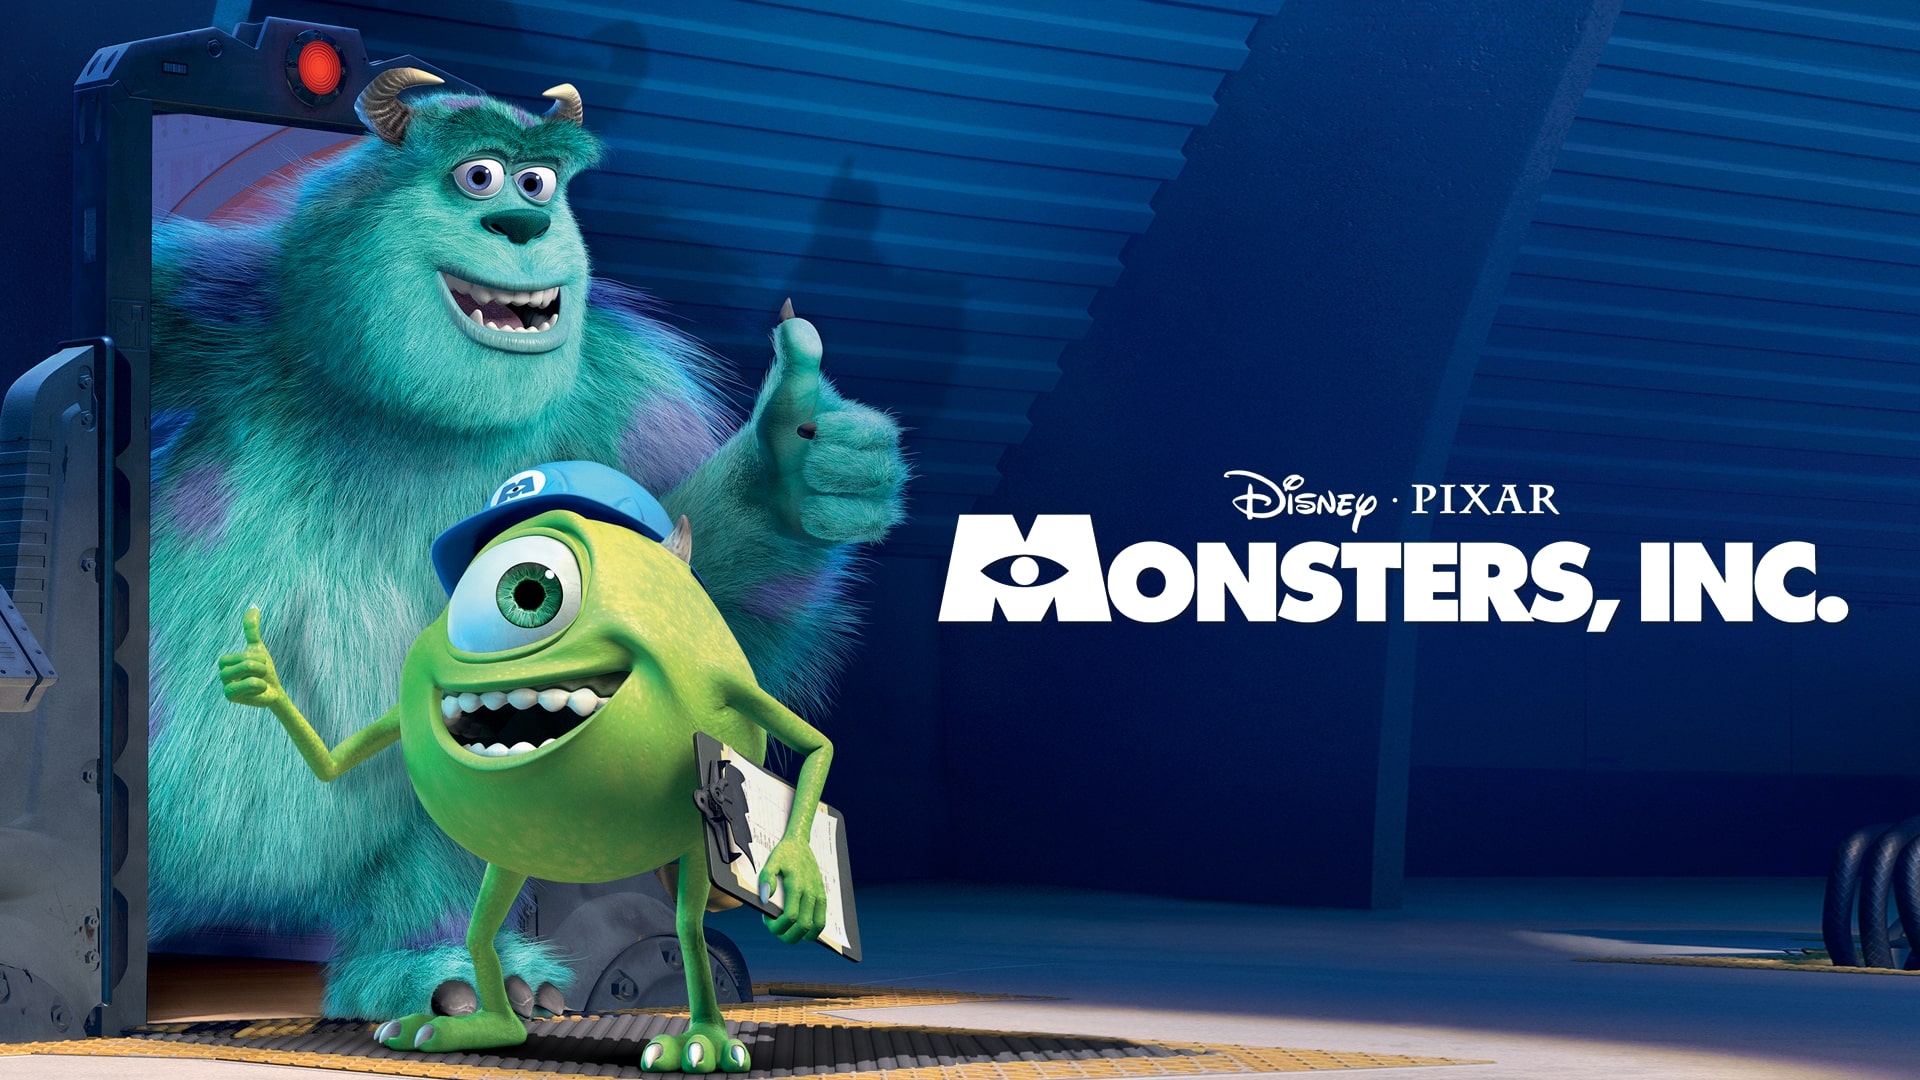 Monsters Inc. is one of the best comedies on Disney Plus